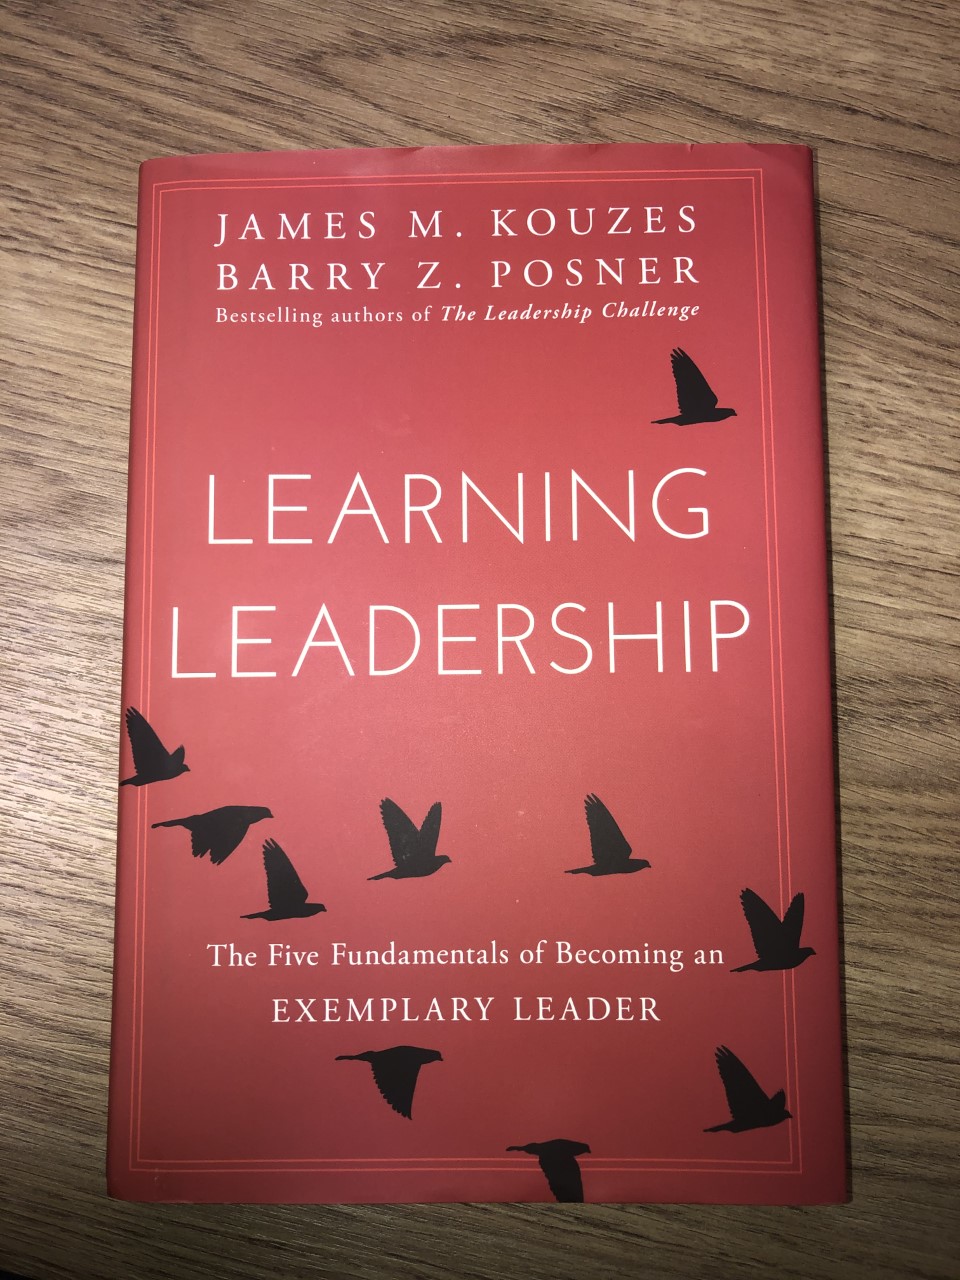 The book "Learning Leadership" by James Kouzes and Barry Posner.